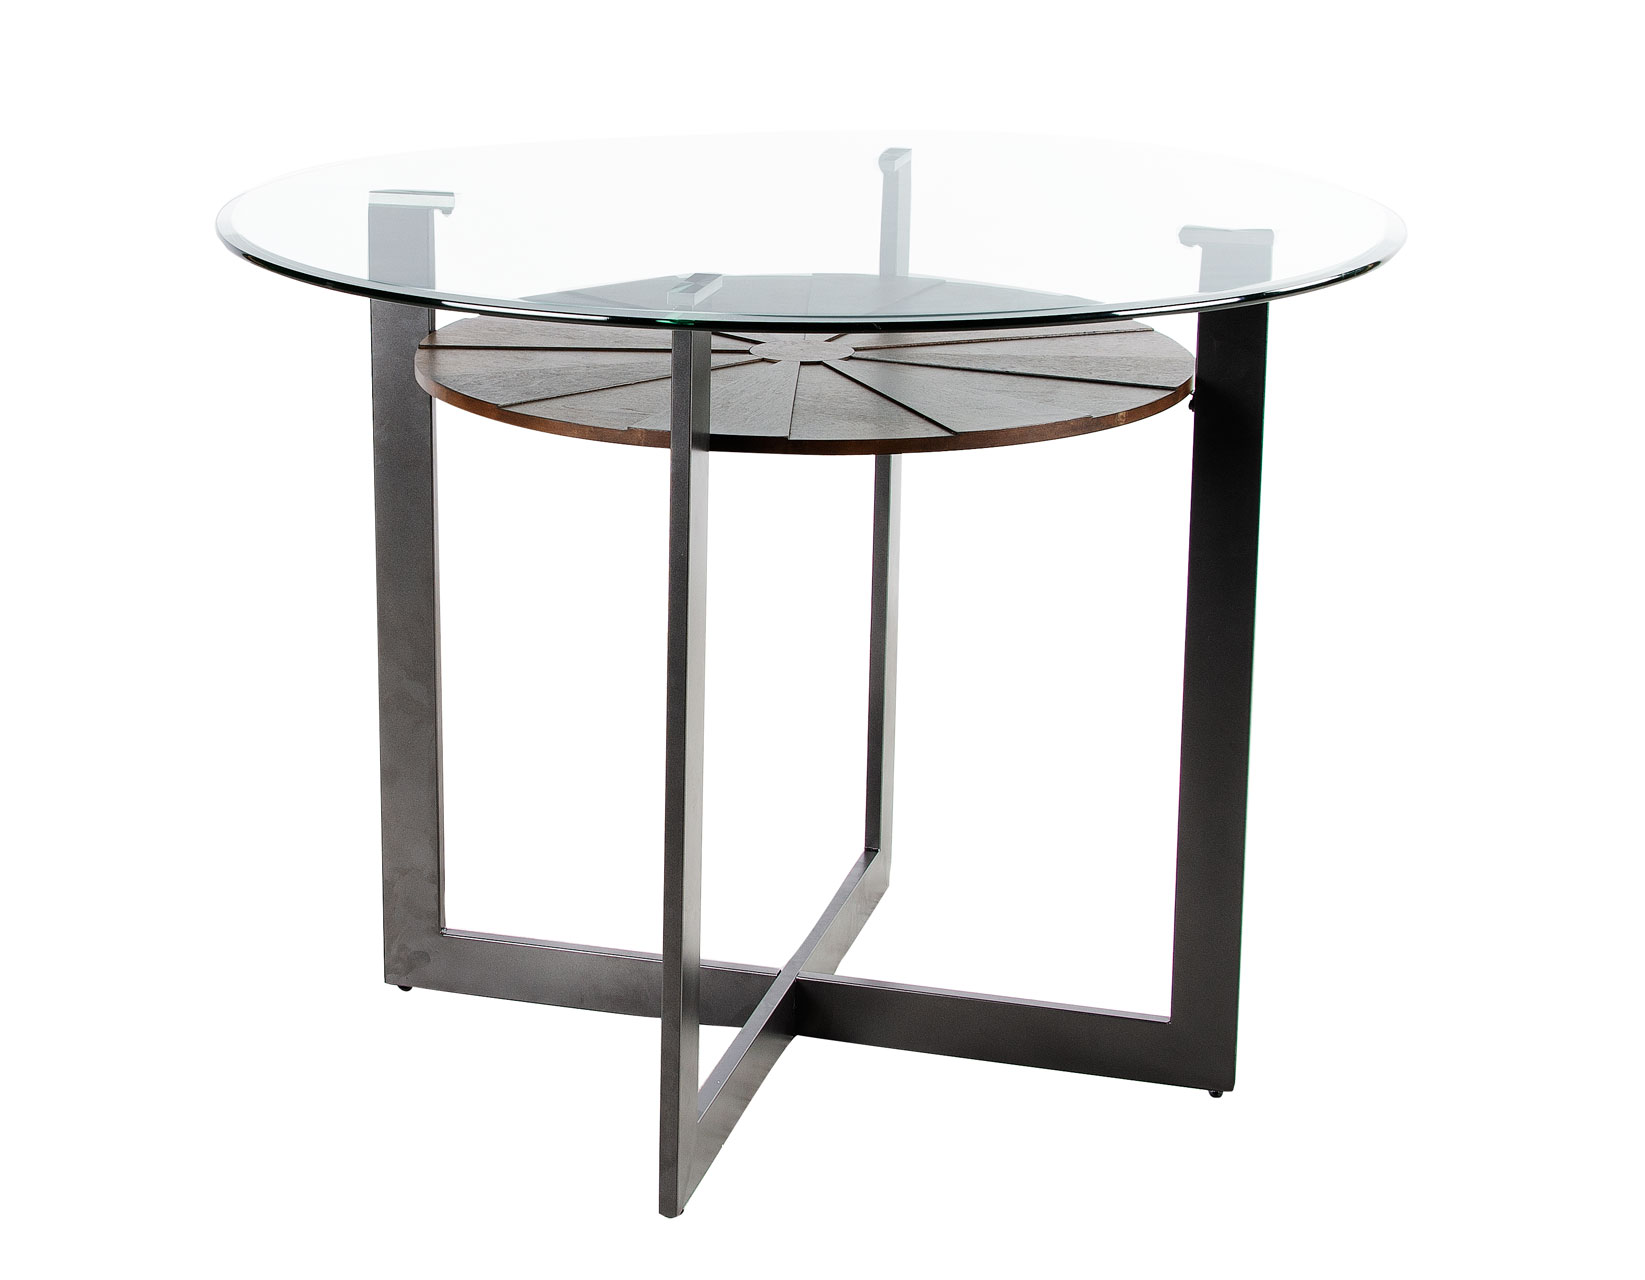 Olson 48-inch Counter Glass Top Table - DFW